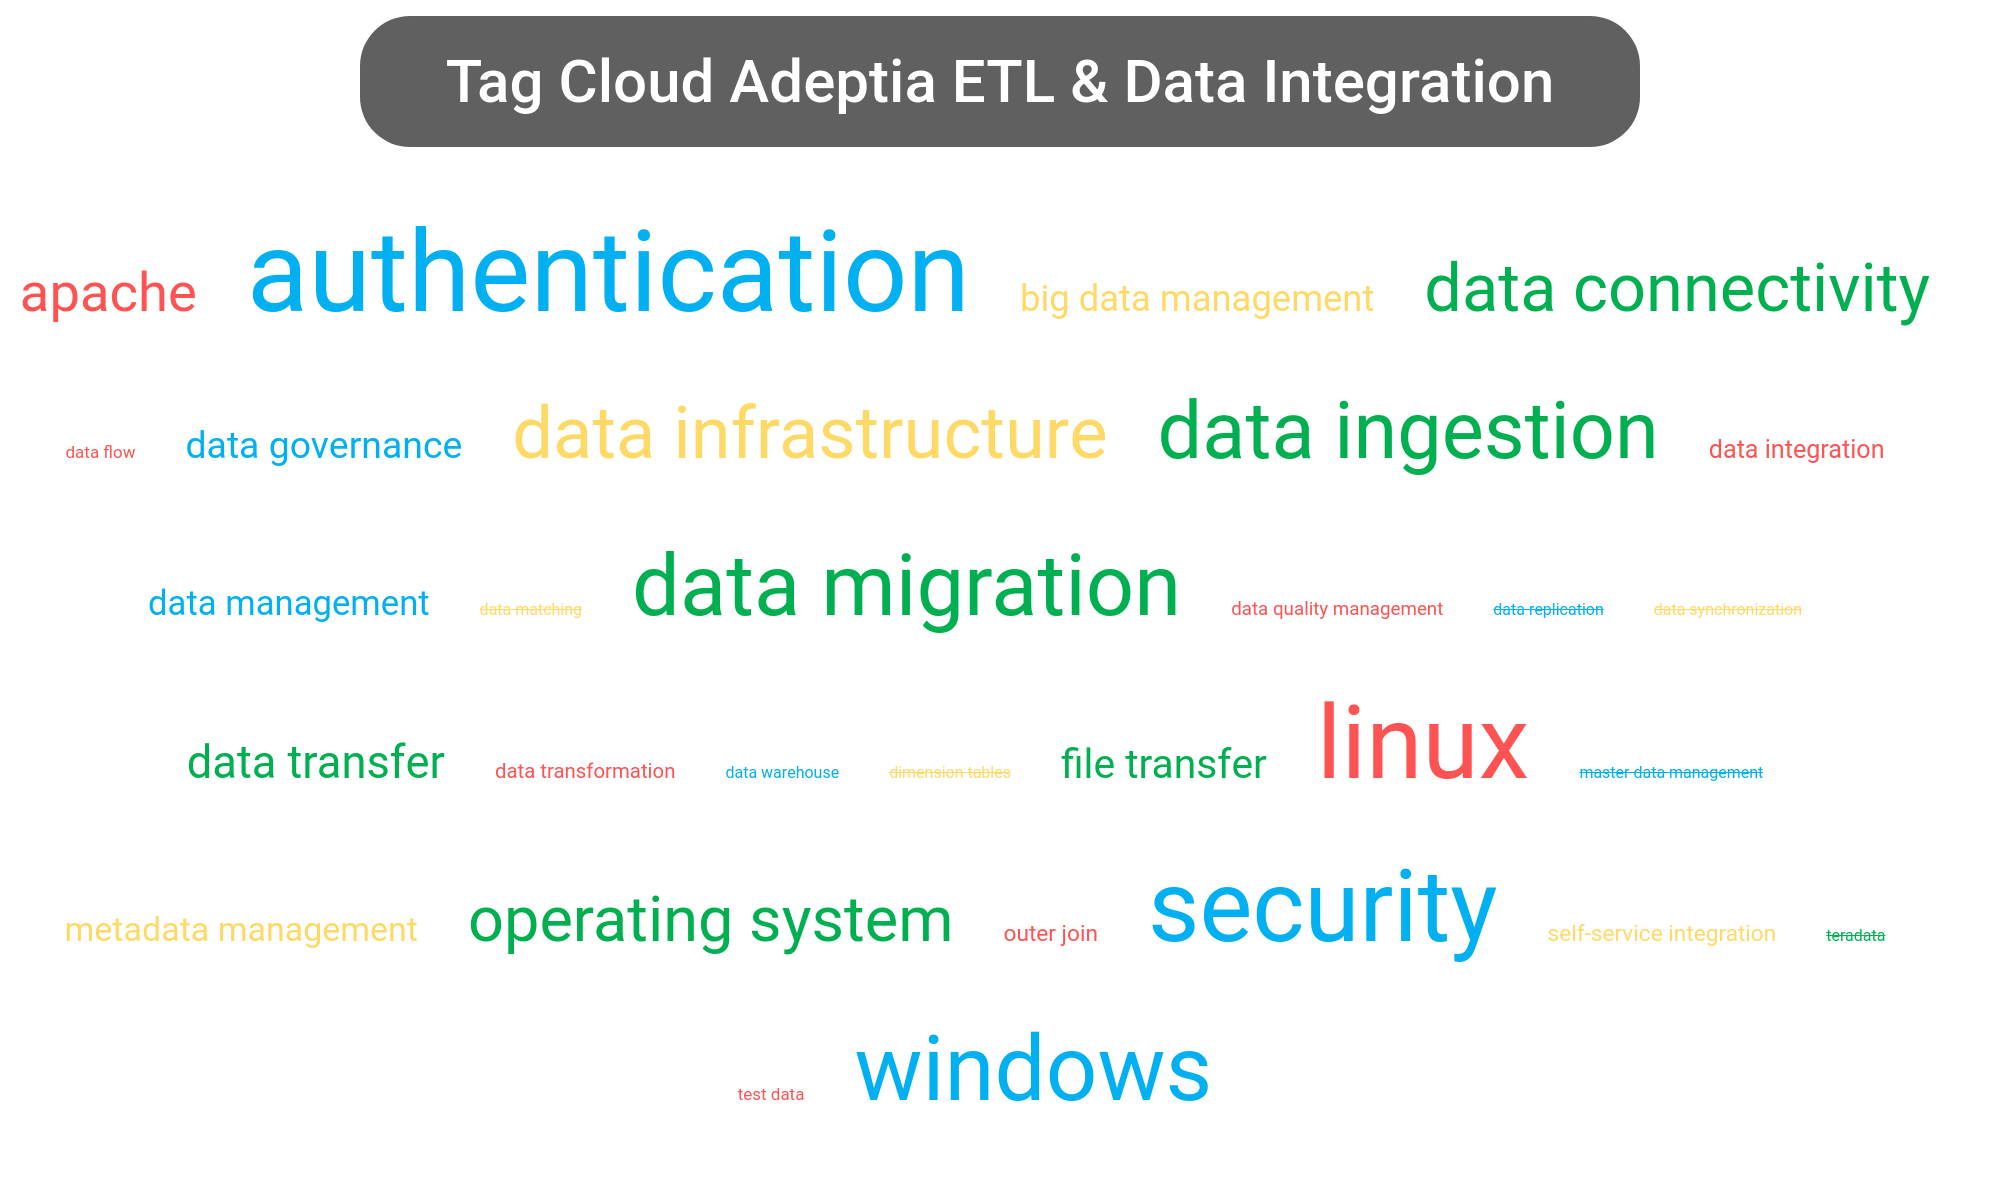 Tag cloud of the Adeptia Integration software.